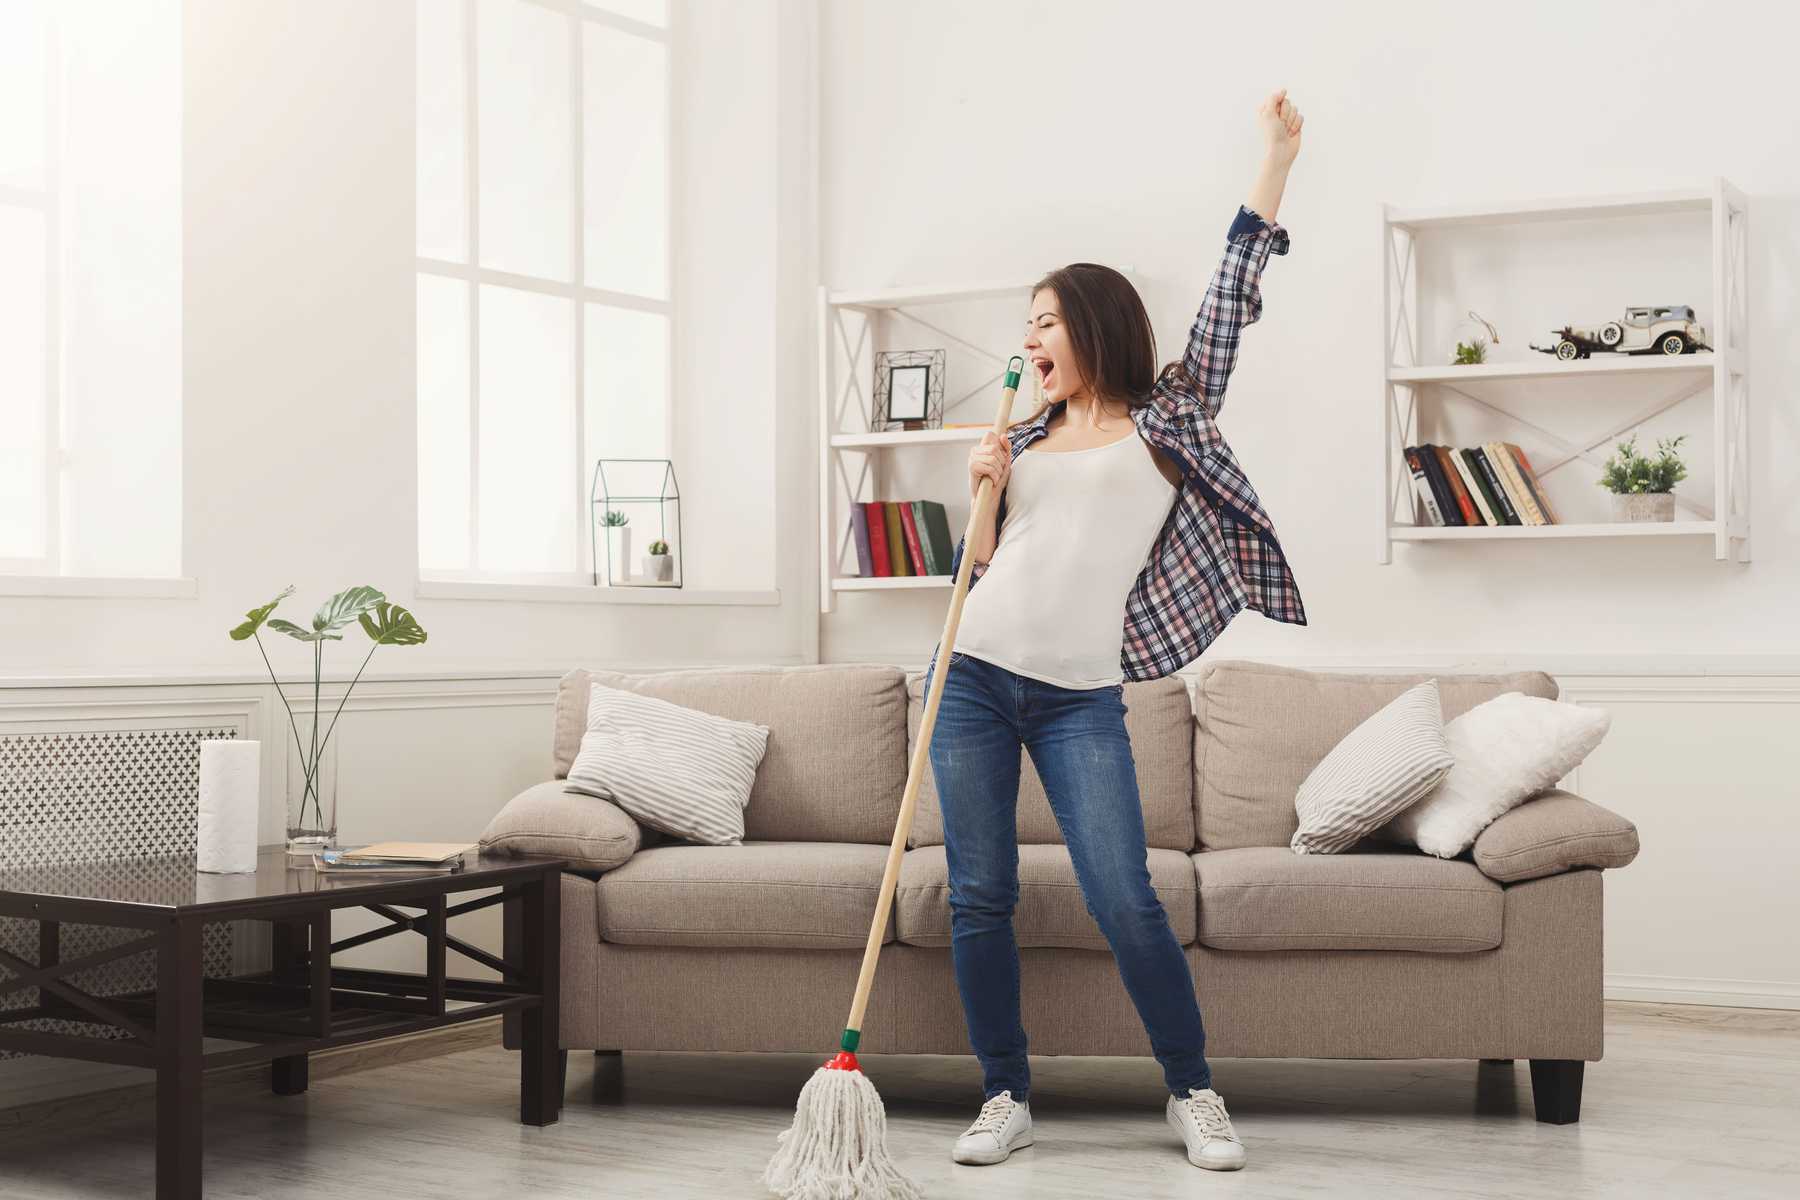 What You Need to Know When Choosing a Cleaning Service